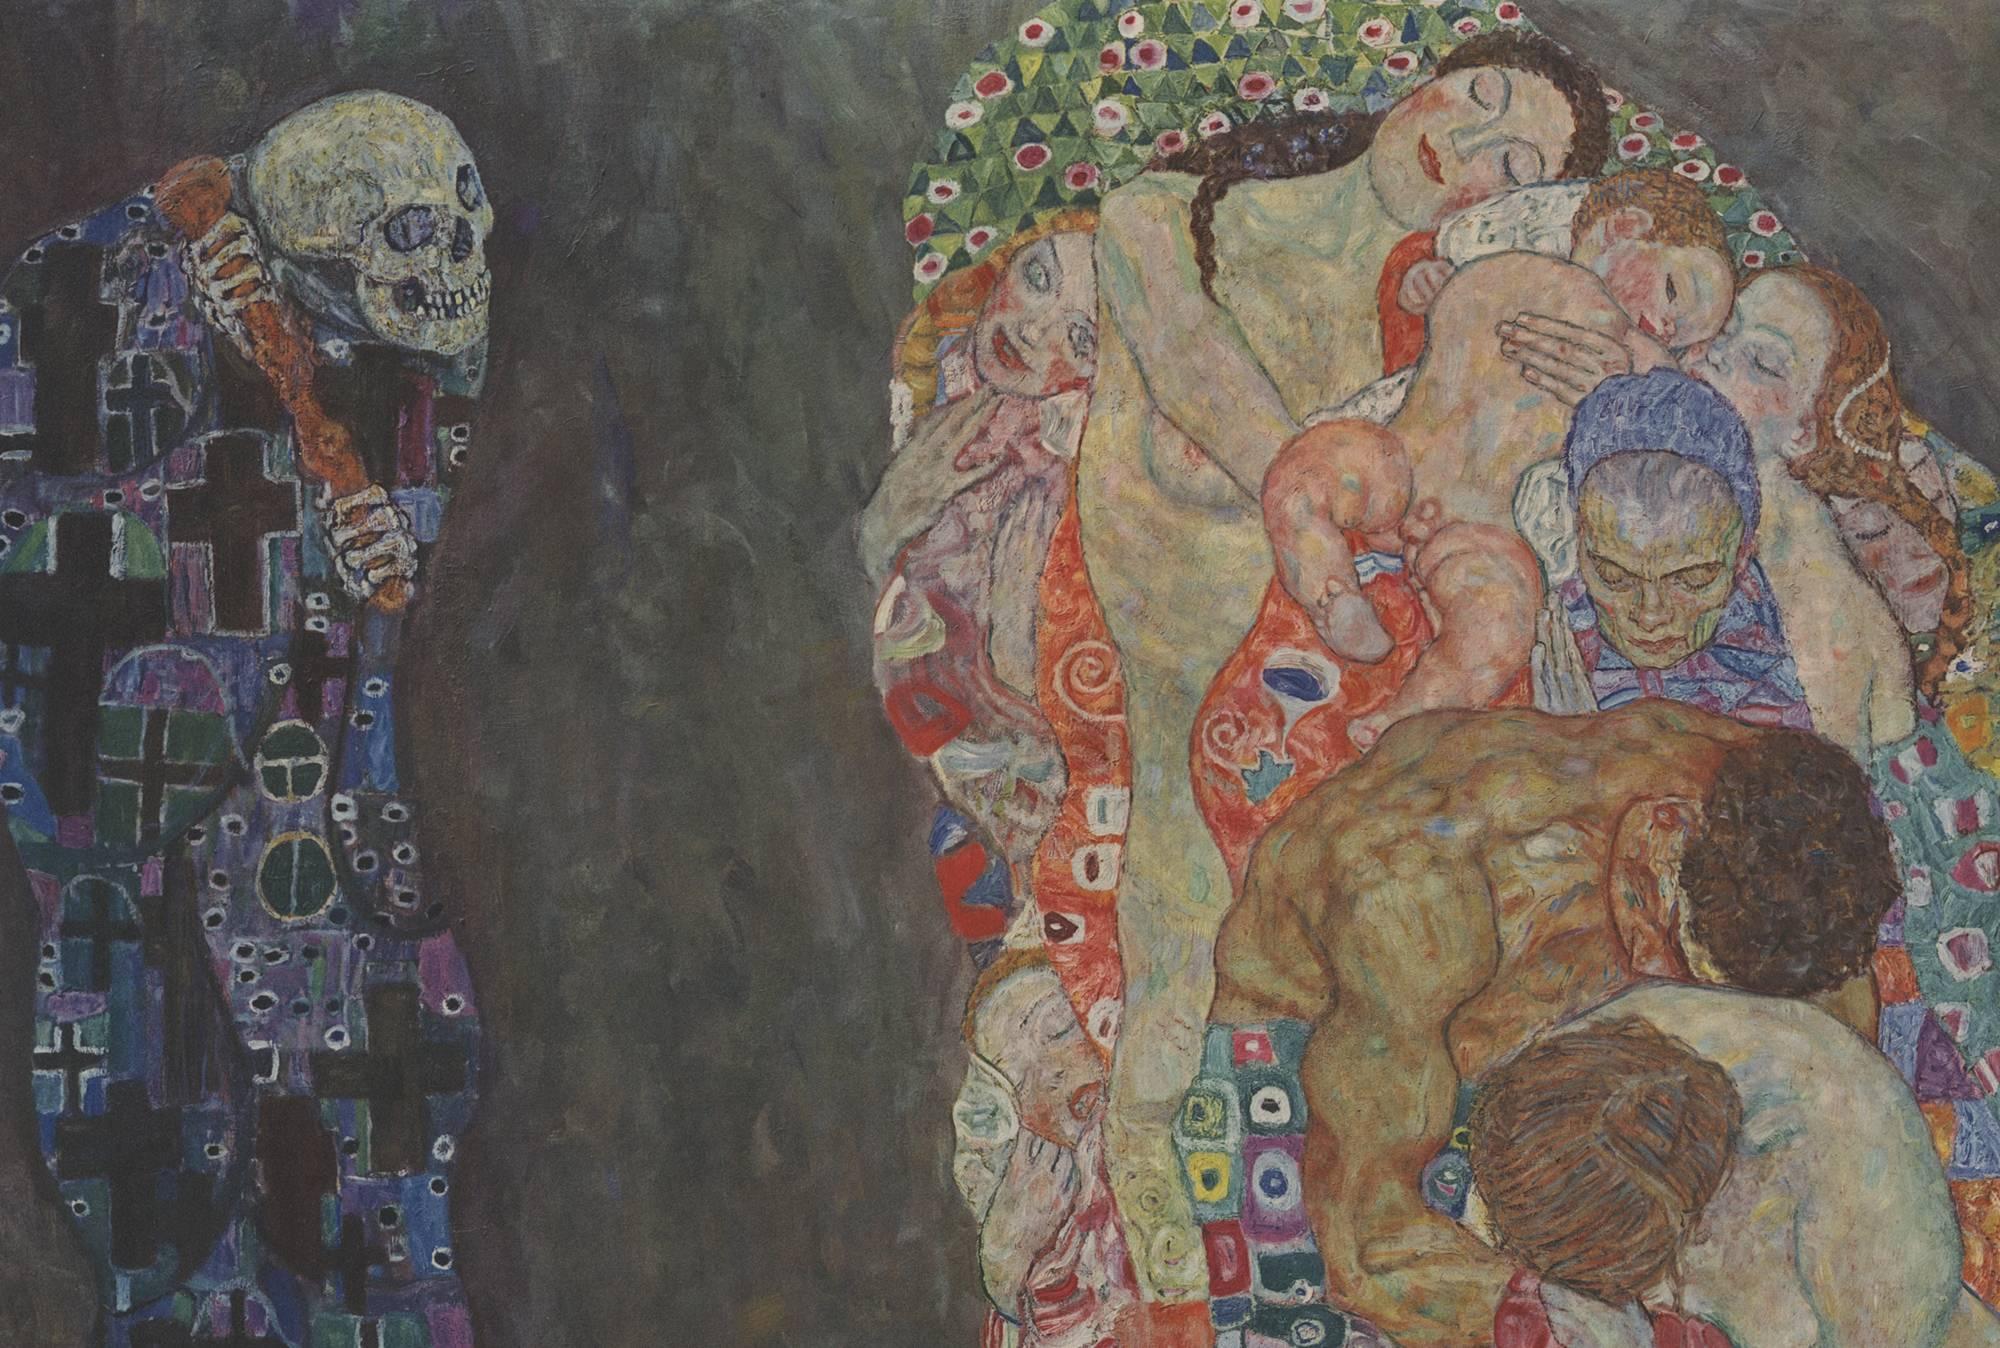 Max Eisler Eine Nachlese folio “Allegory of Life and Death” collotype print - Print by (after) Gustav Klimt